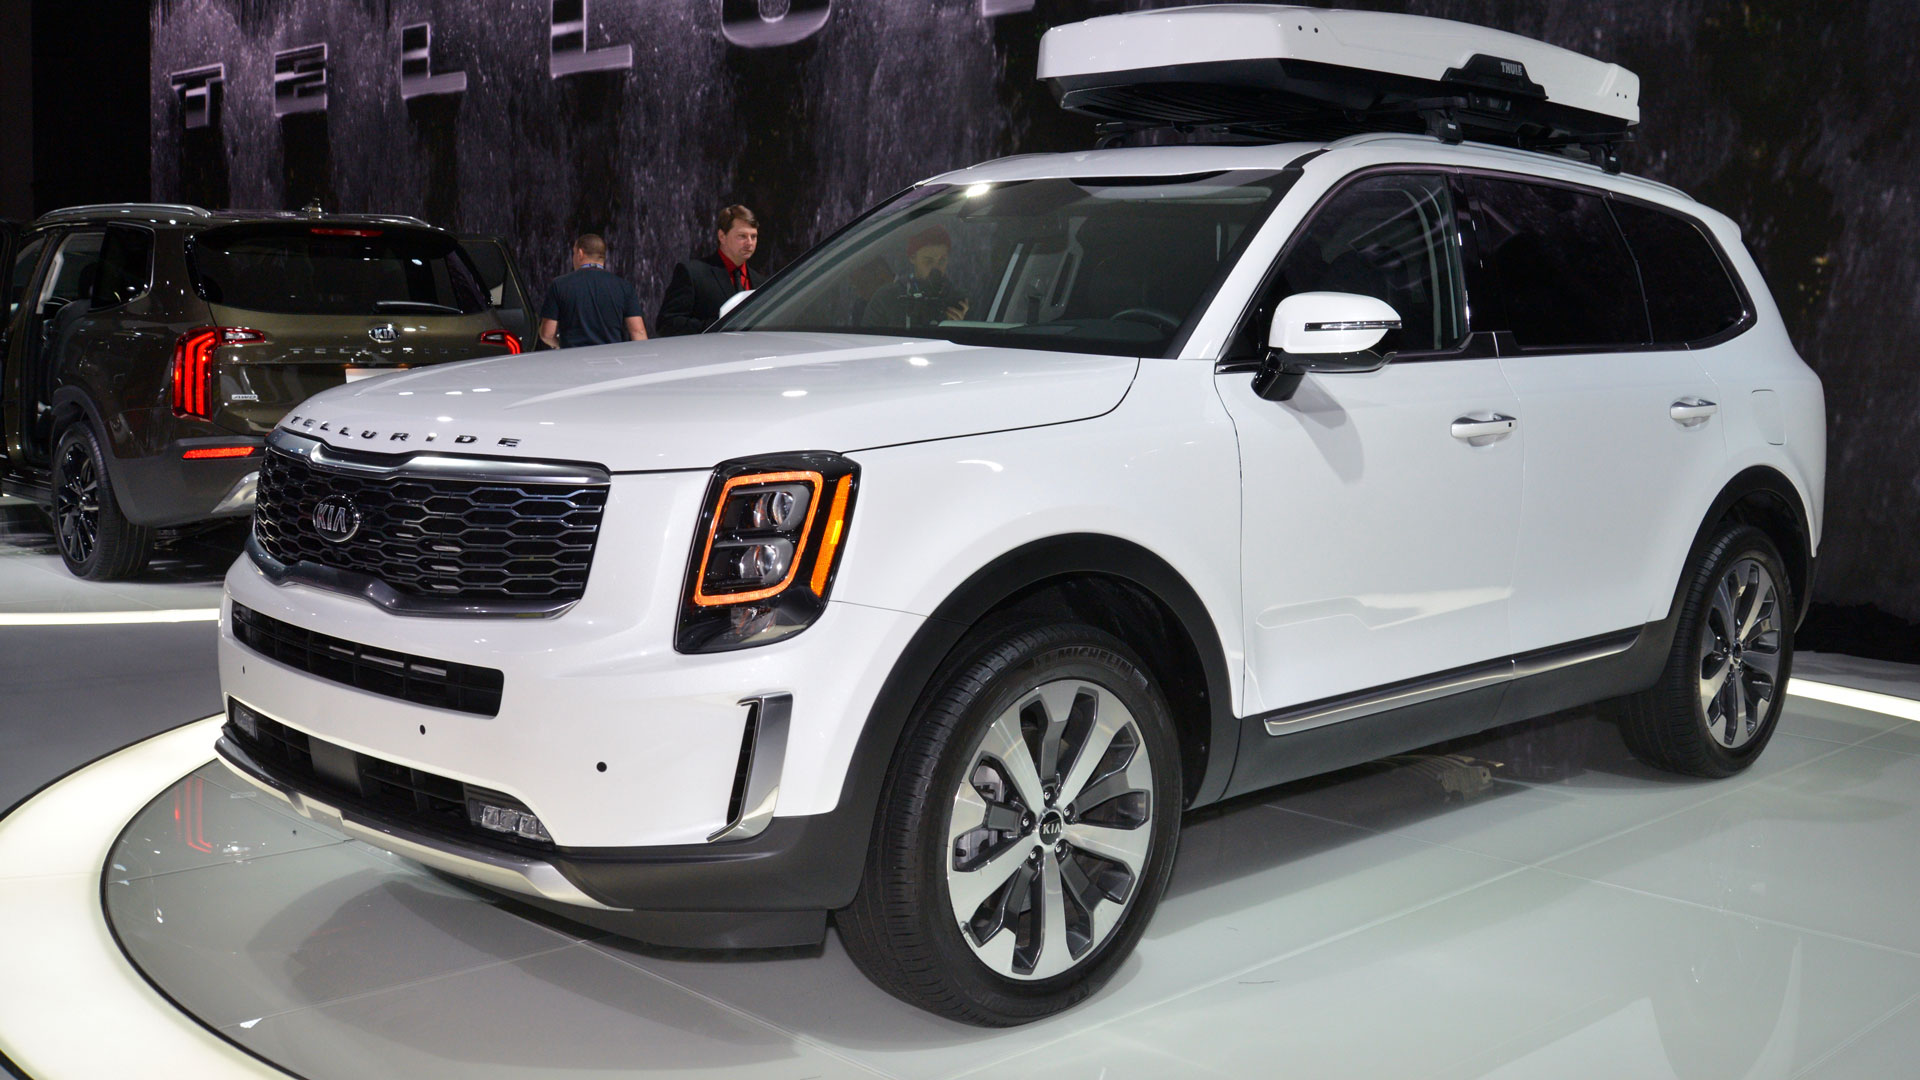 2020 Kia Telluride Rated At Up To 23 MPG Combined  Carscoops